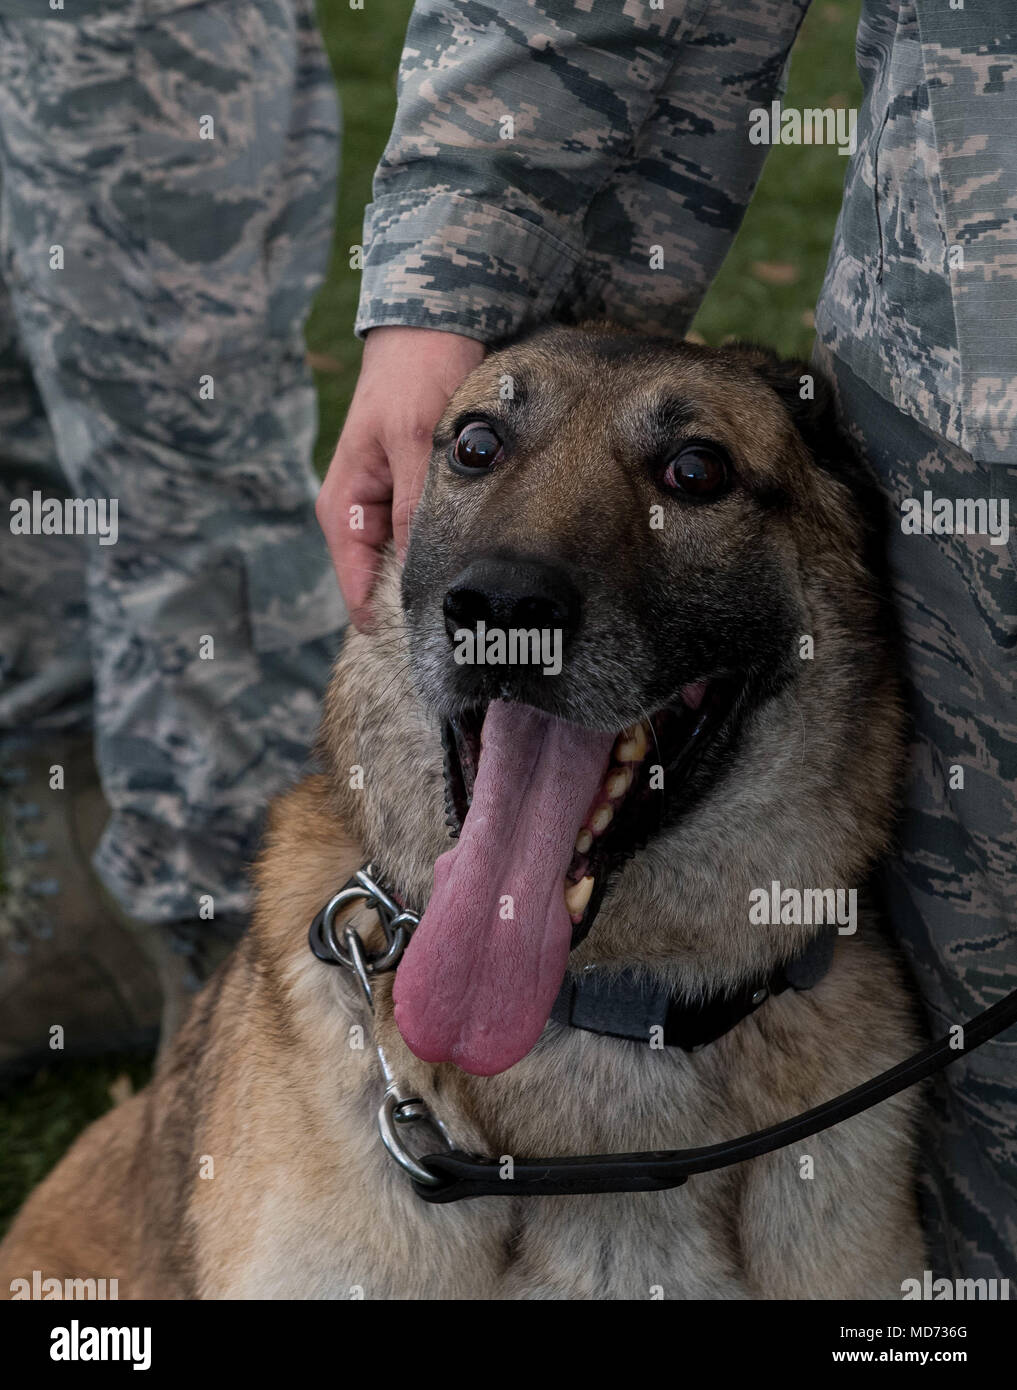 Senior Airman Jesse Terrigino, 2nd Security Forces Squadron military working dog trainer, pets Kuno, 2nd SFS MWD, after the completion of Kuno’s retirement ceremony at Barksdale Air Force Base, La., March 16, 2018. Kuno was adopted by Terrigino and is staying with him for the rest of his life. (U.S. Air Force photo by Airman 1st Class Tessa B. Corrick) Stock Photo